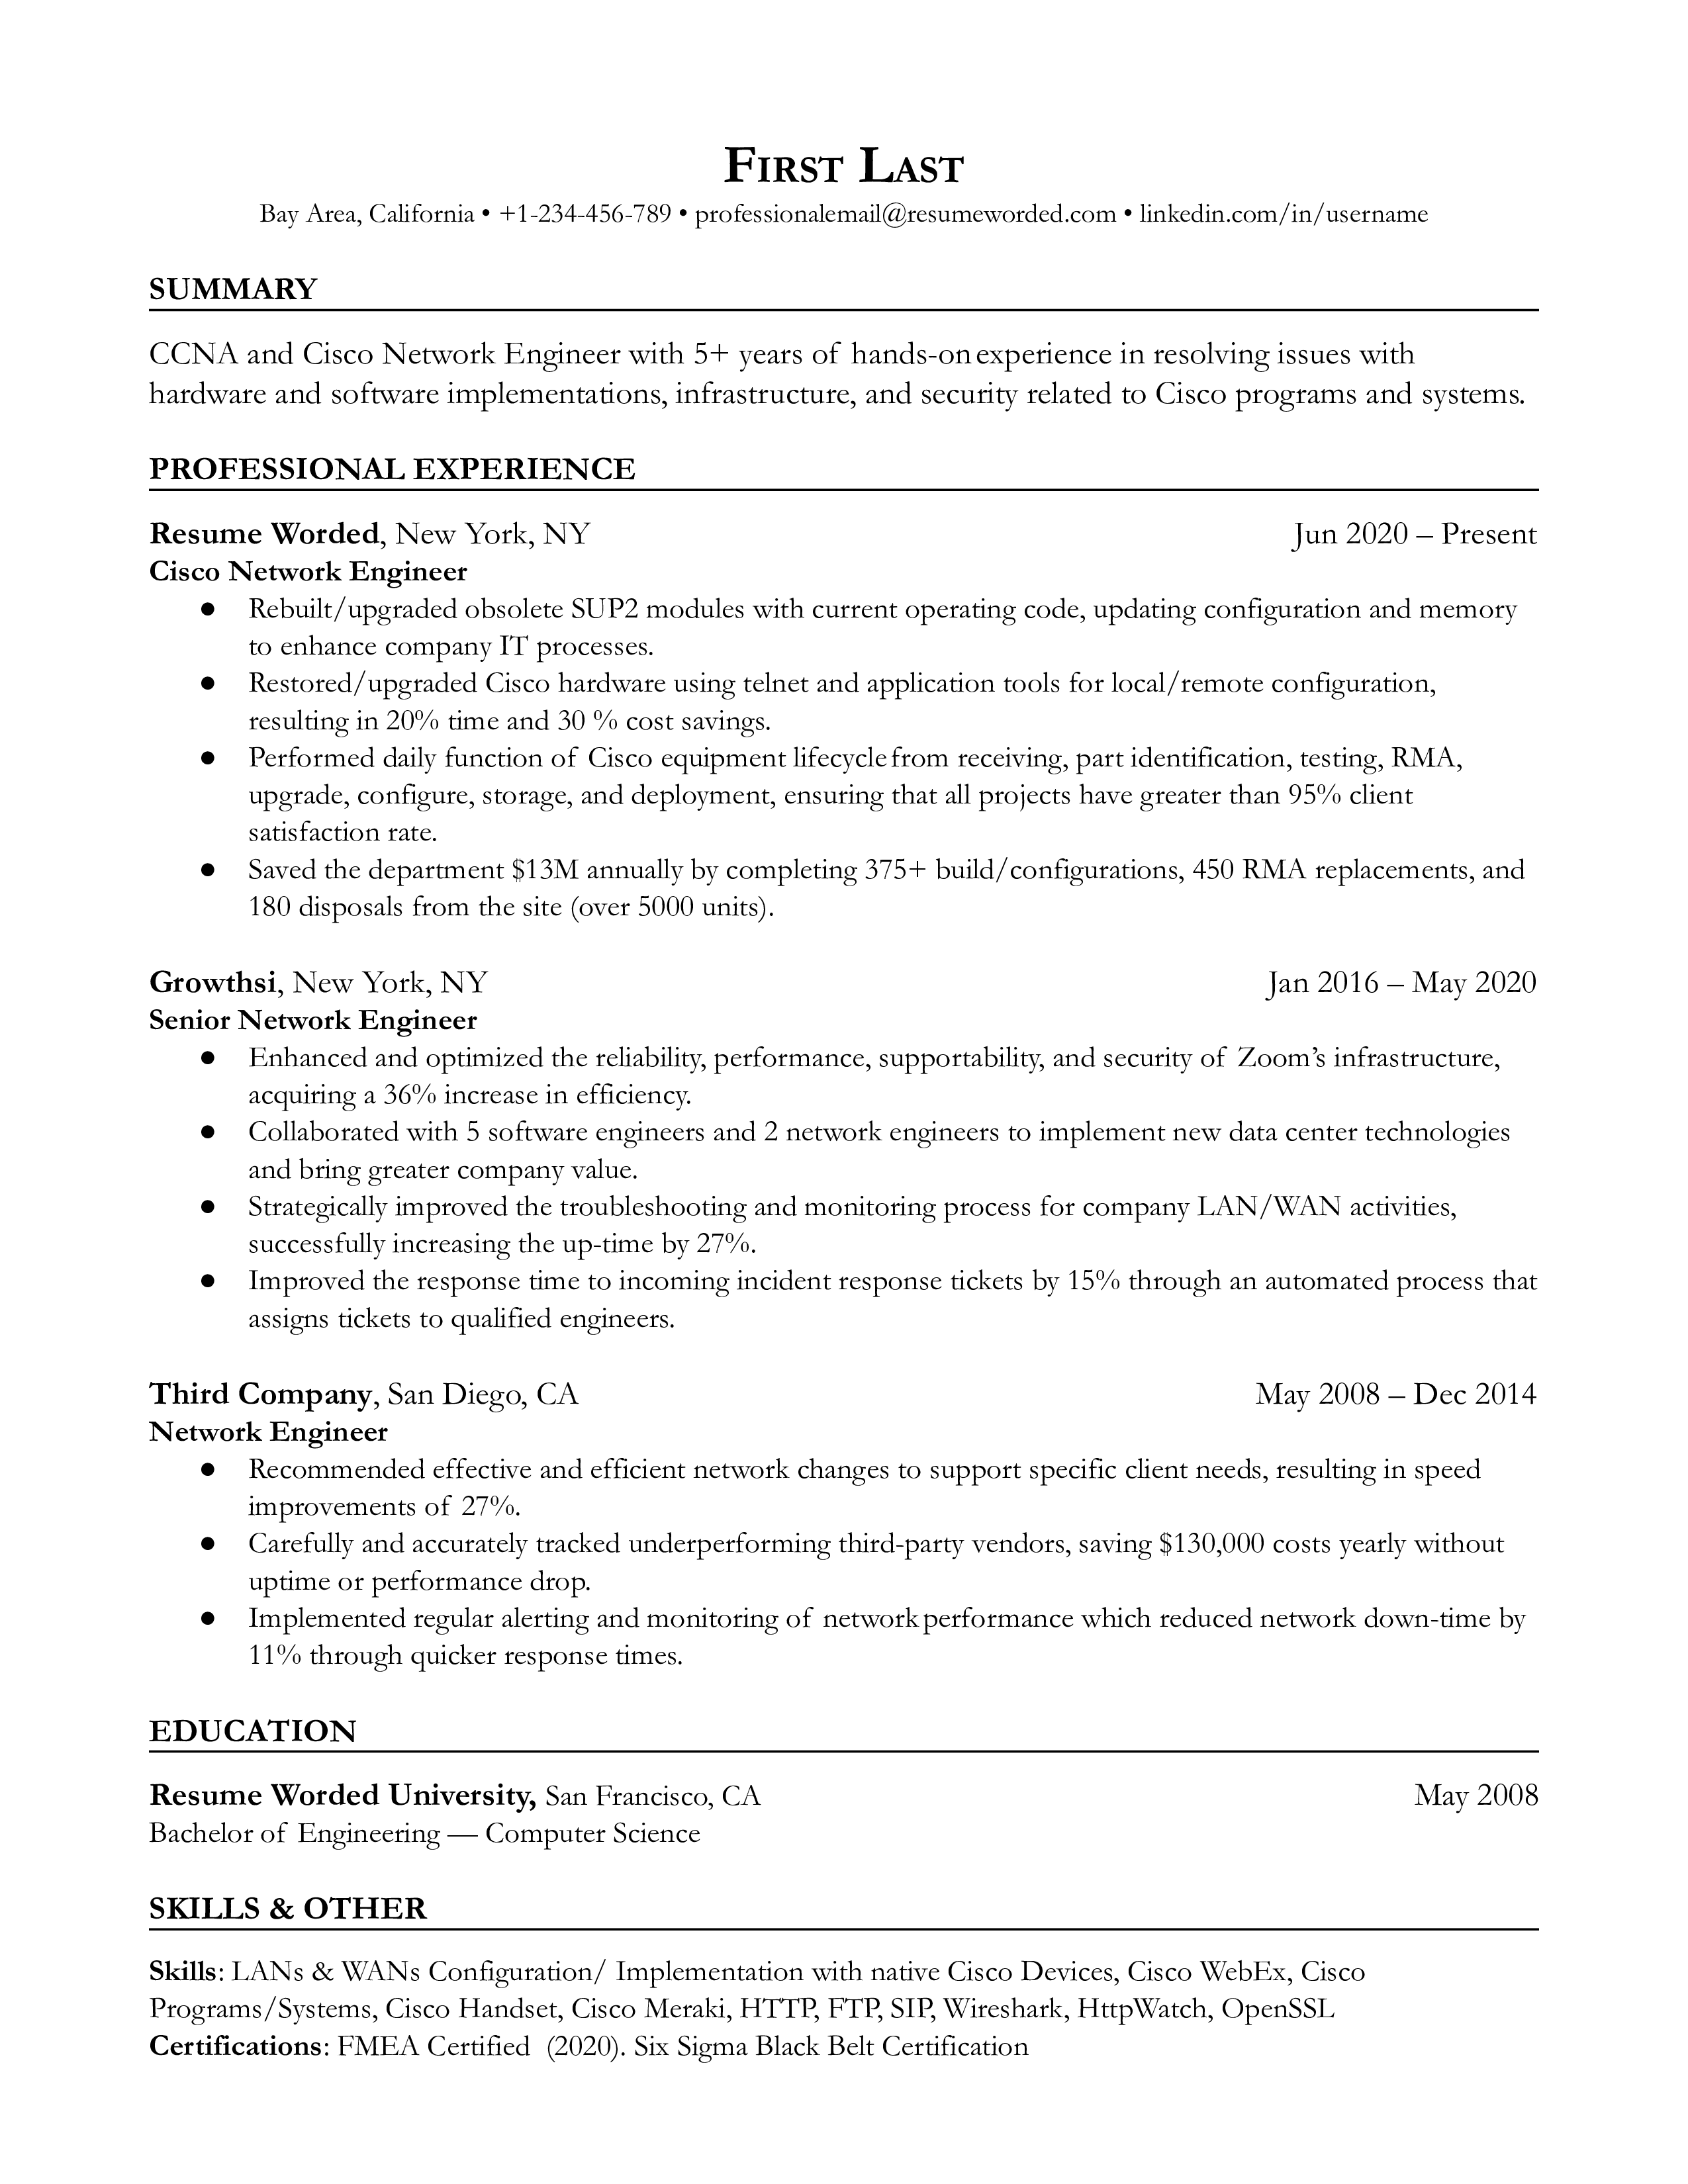 Cisco Network Engineer CV featuring technical skills and problem-solving experiences.